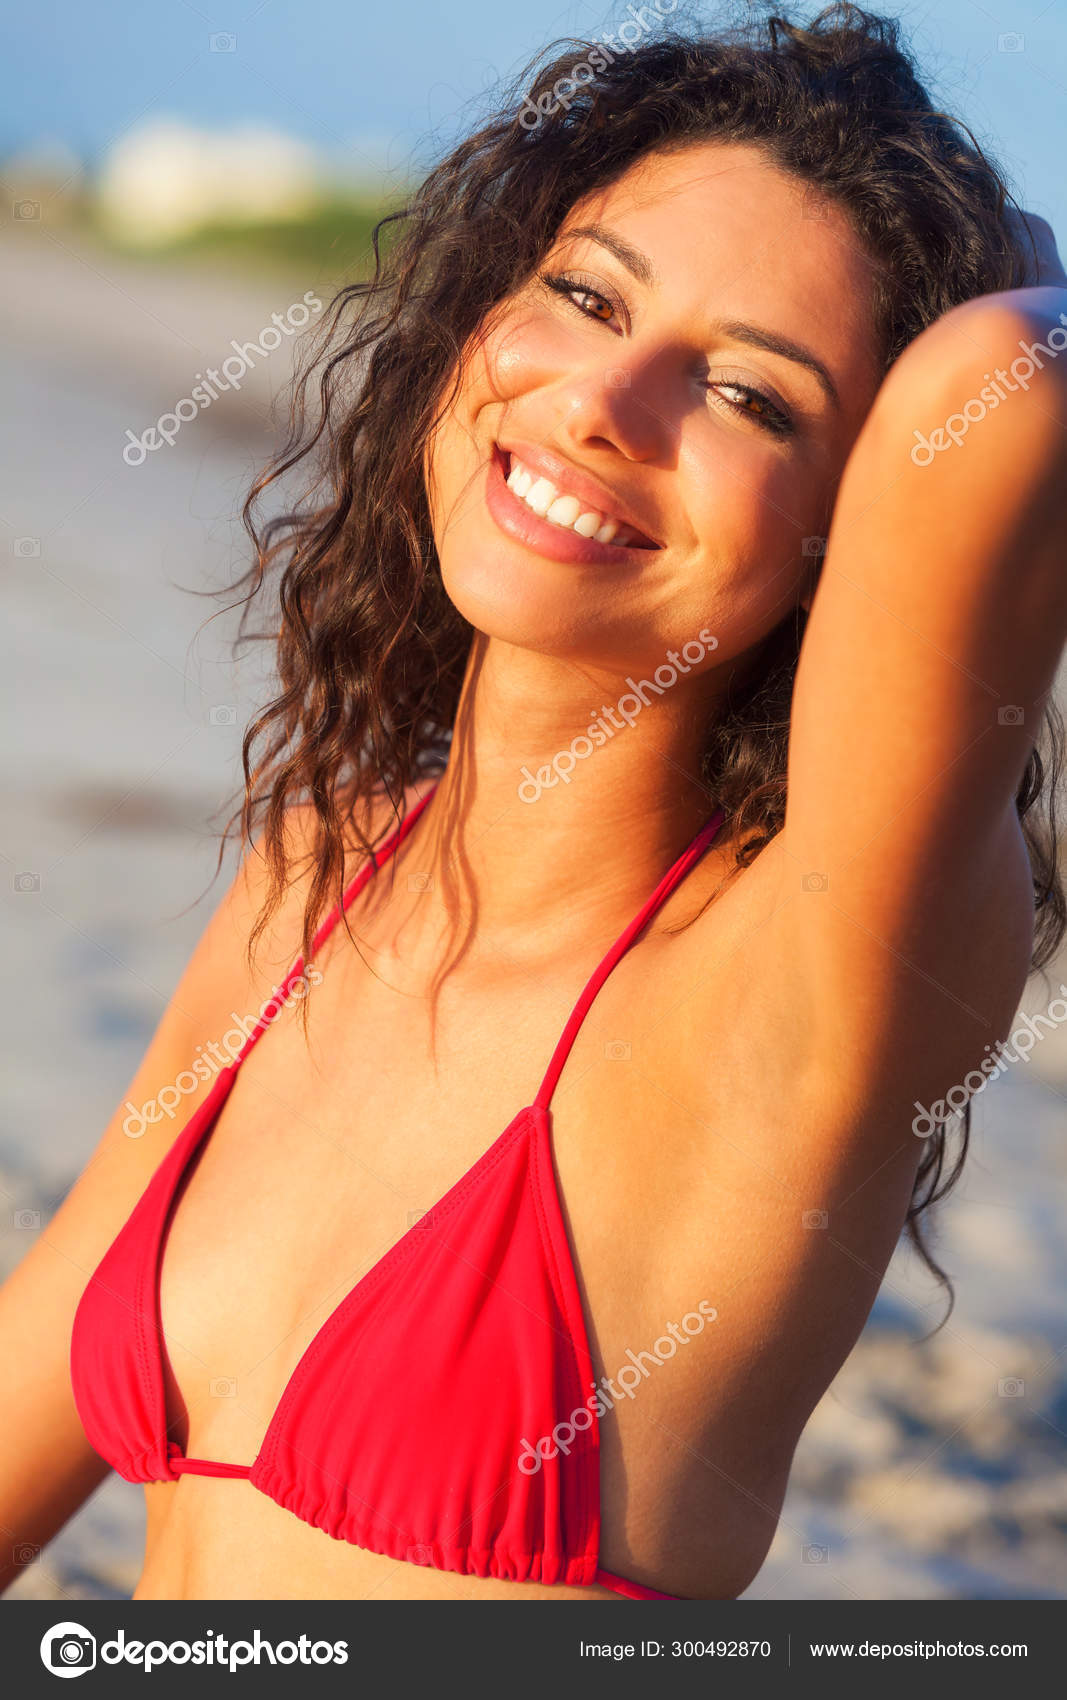 Young woman in red bikini on beach - Stock Image - F009/2861 - Science  Photo Library